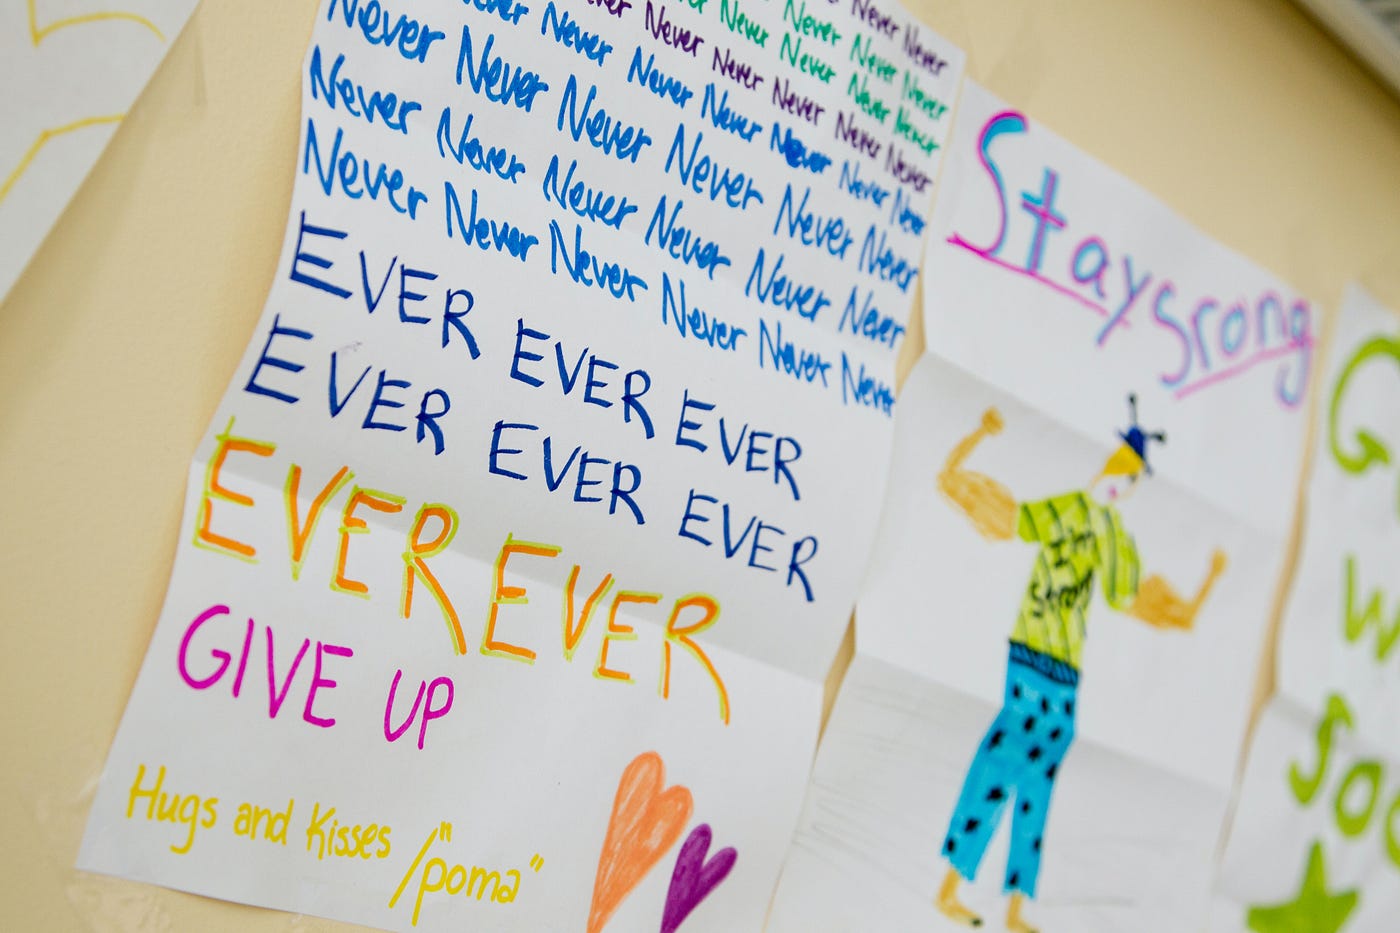 children’s writing that says never ever give up, repeated, and stay strong with a drawing of a strong person